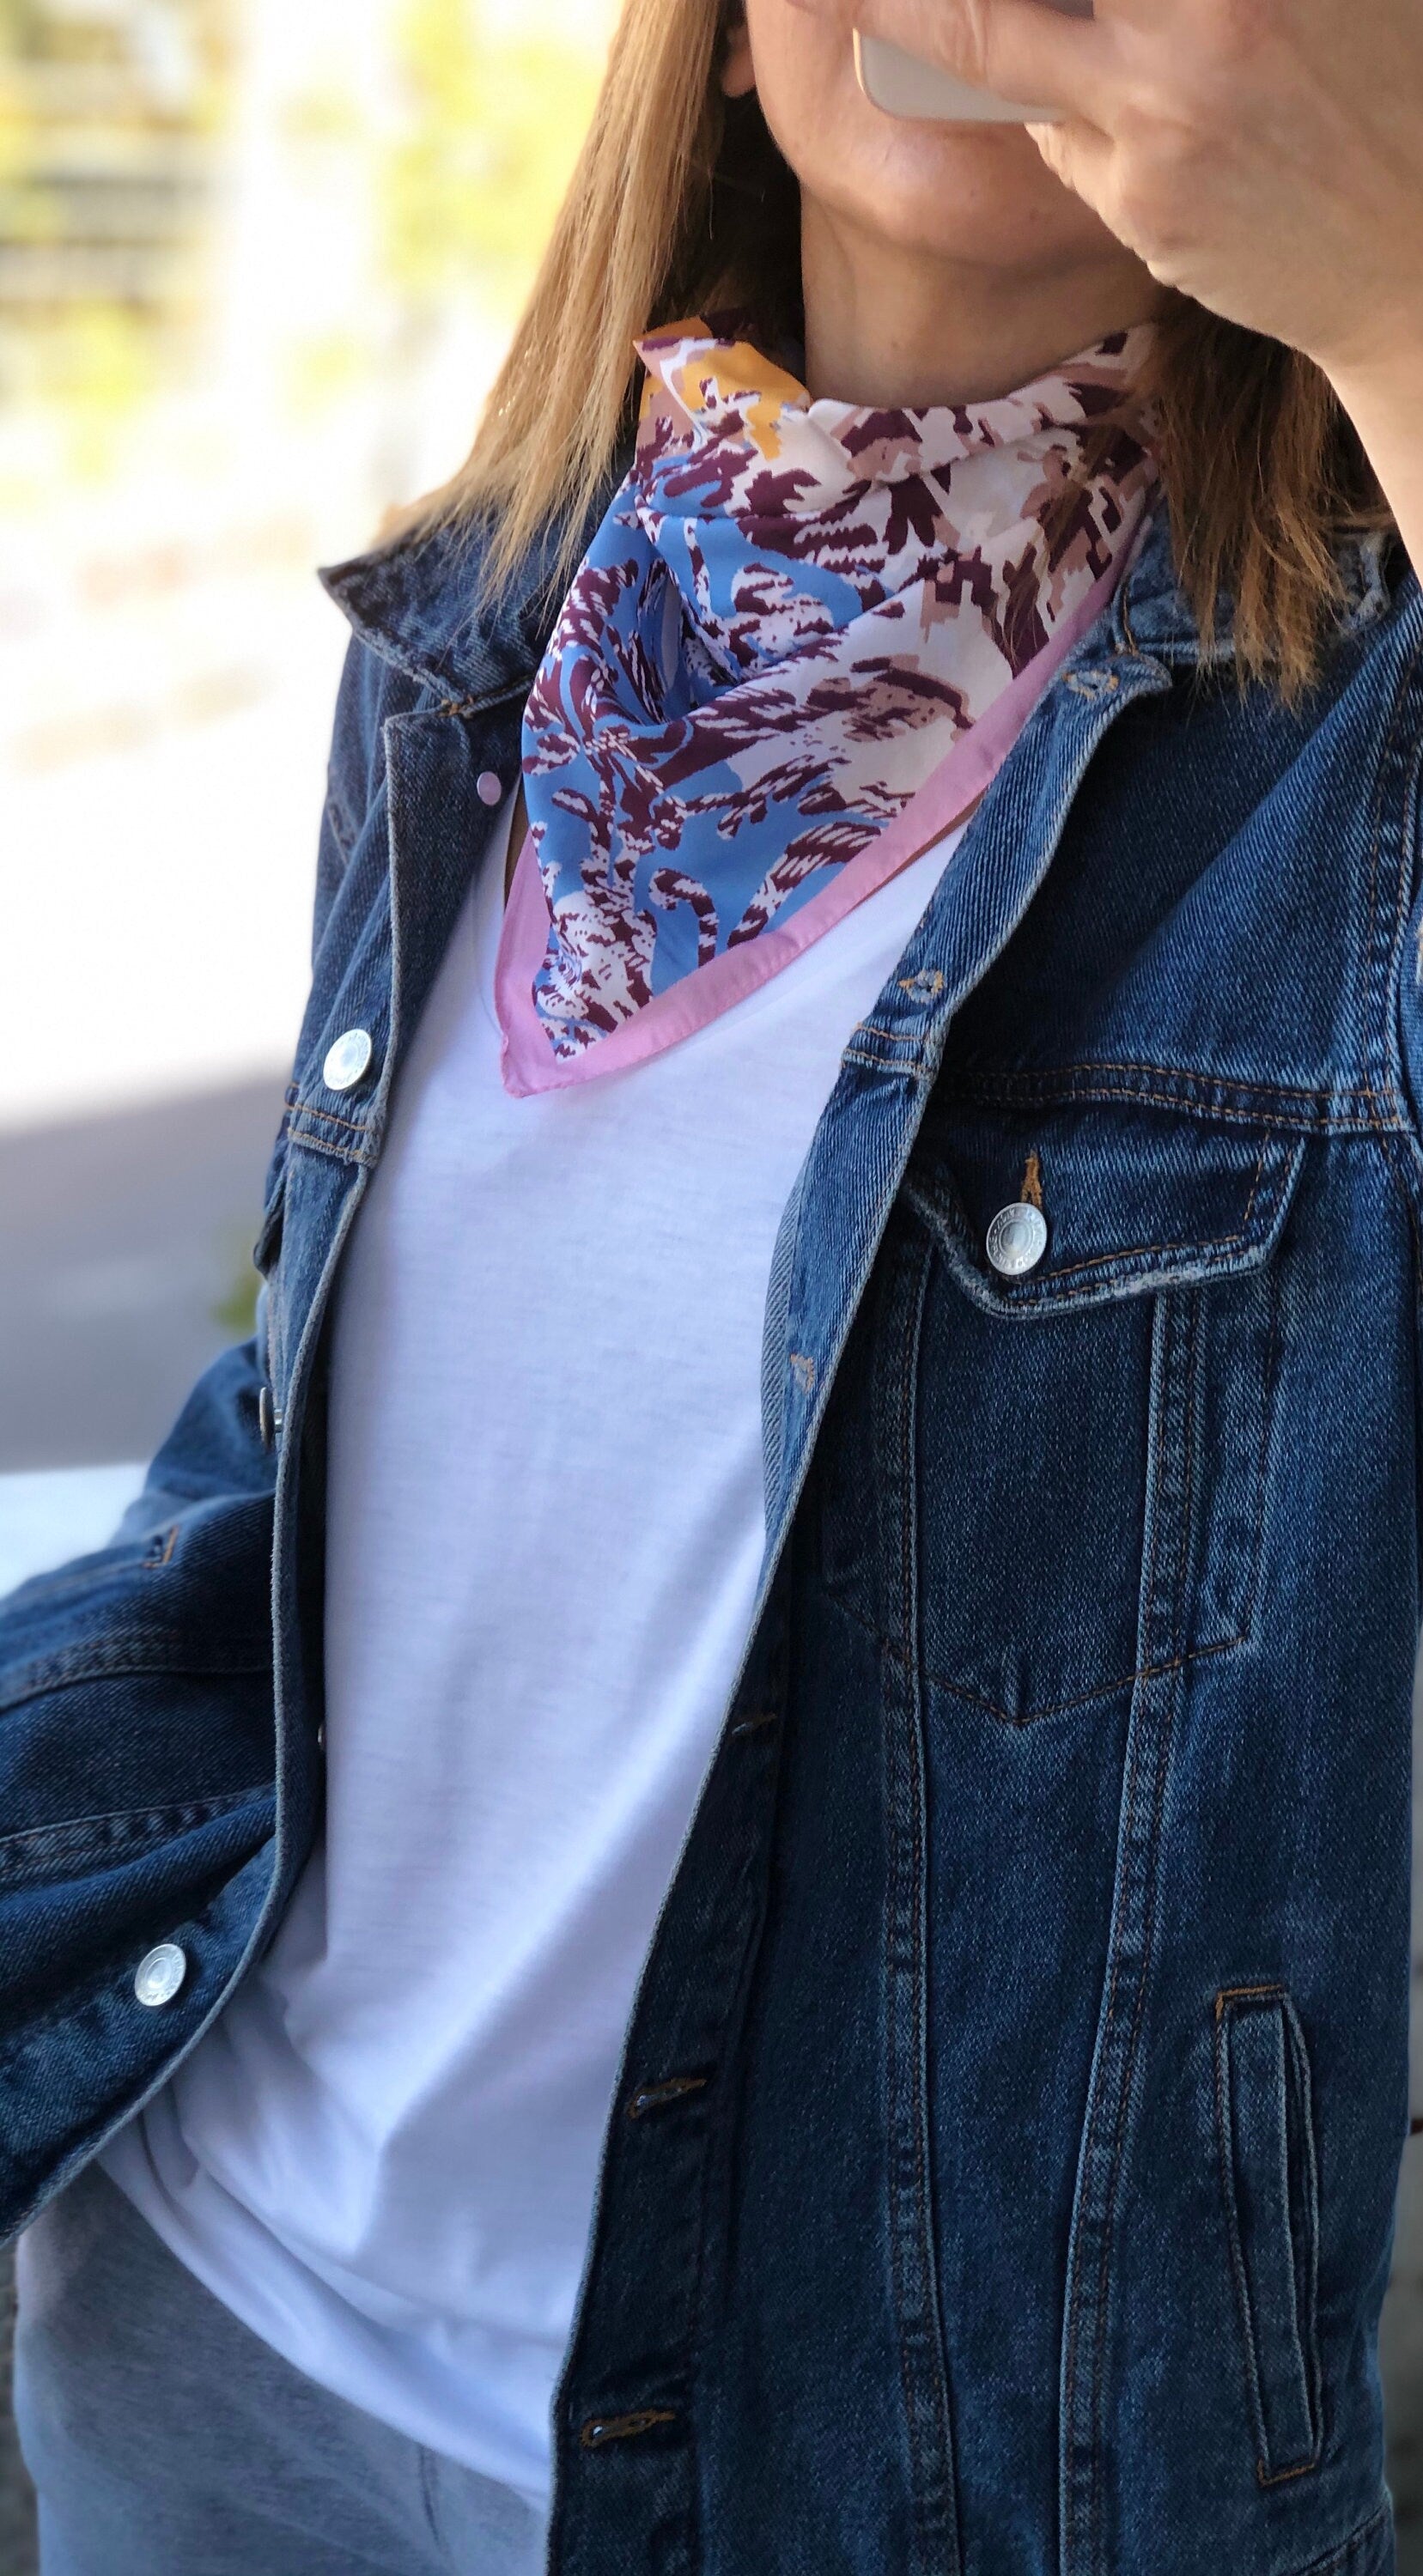 Stay stylish and comfortable with this pink hair scarf, perfect for any outfit or handbag.